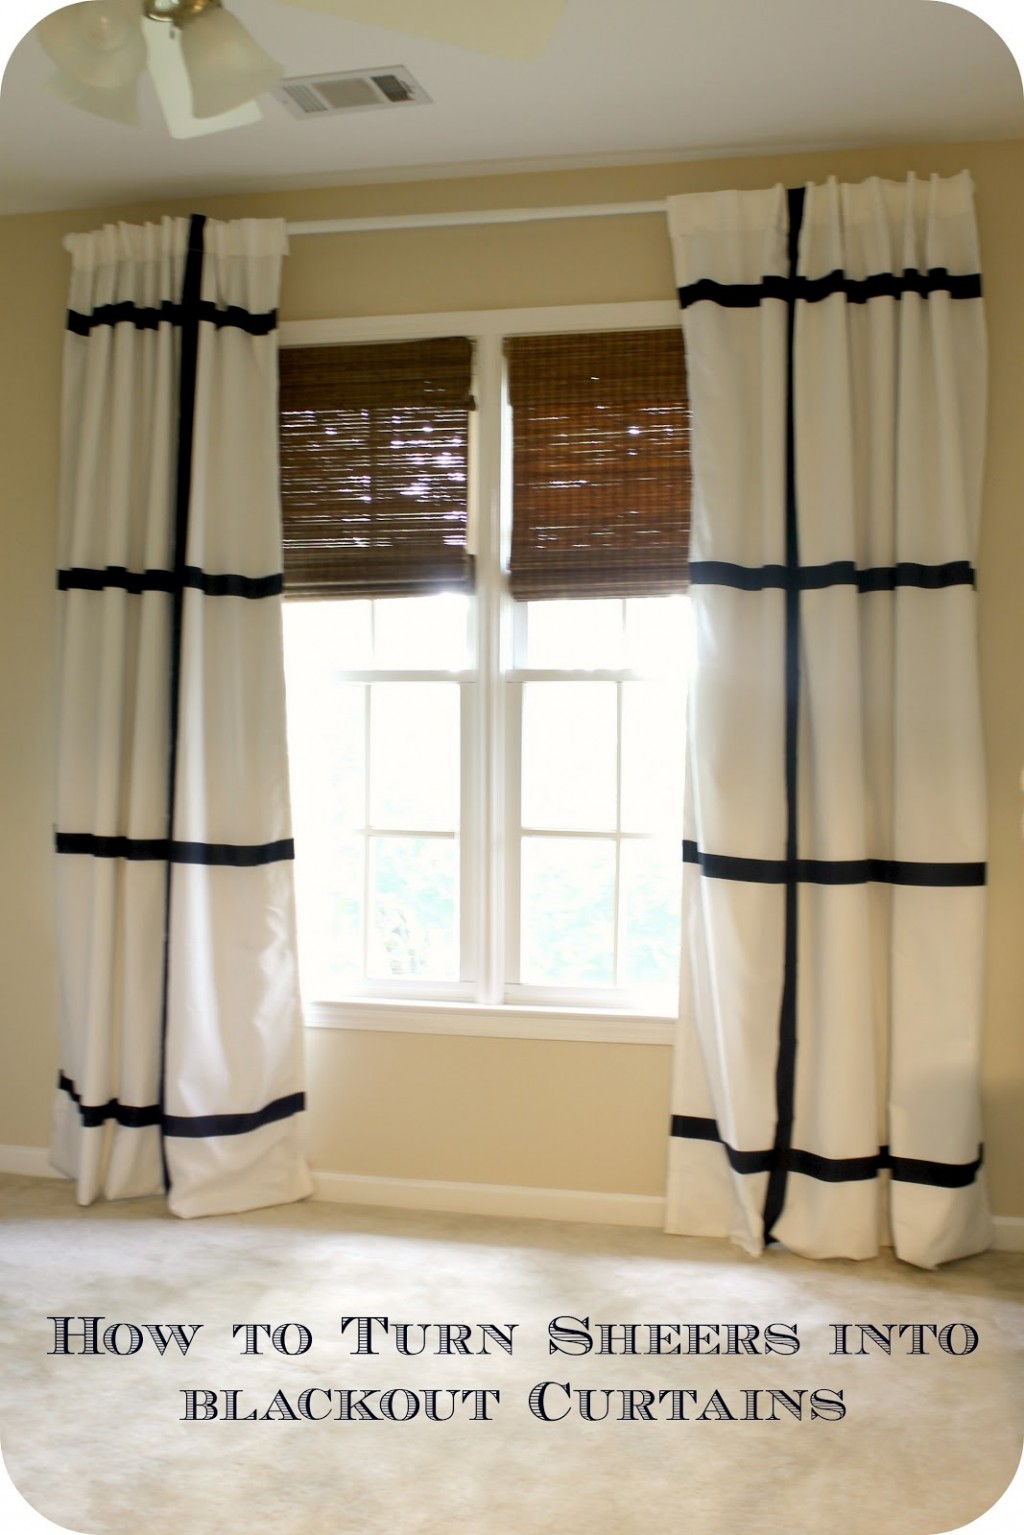 How To Make Blackout Curtains in Curtain